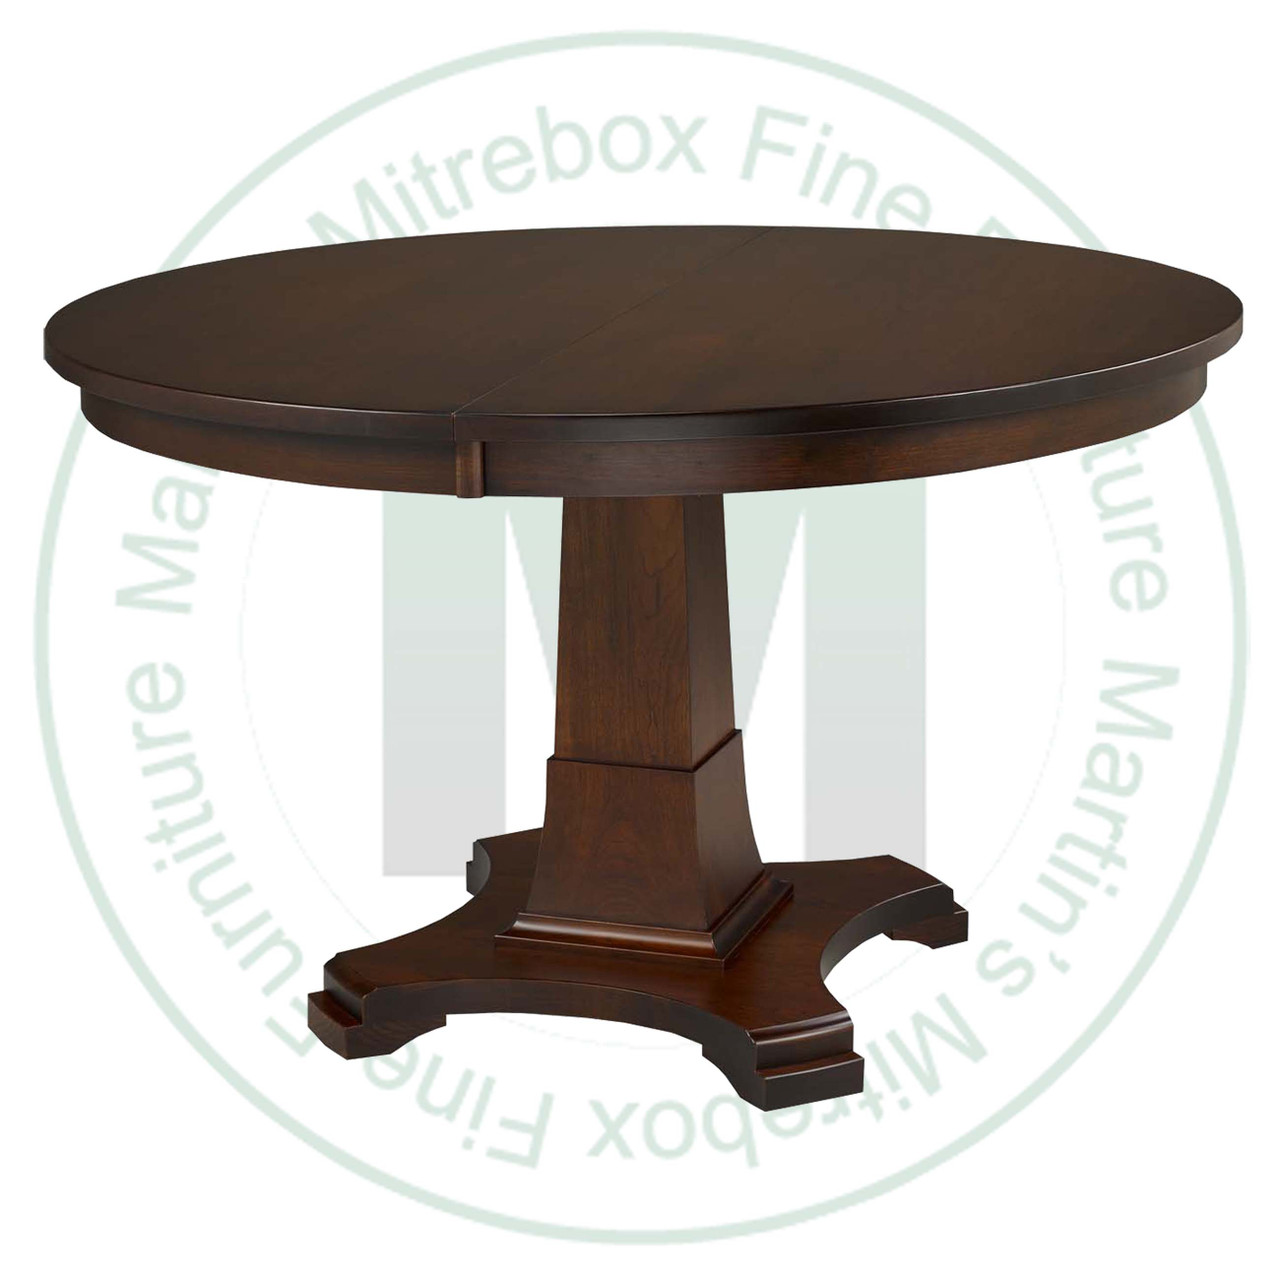 Oak Abbey Single Pedestal Table 60''D x 60''W x 30''H Round Solid Table. Table Has 1.25'' Thick Top